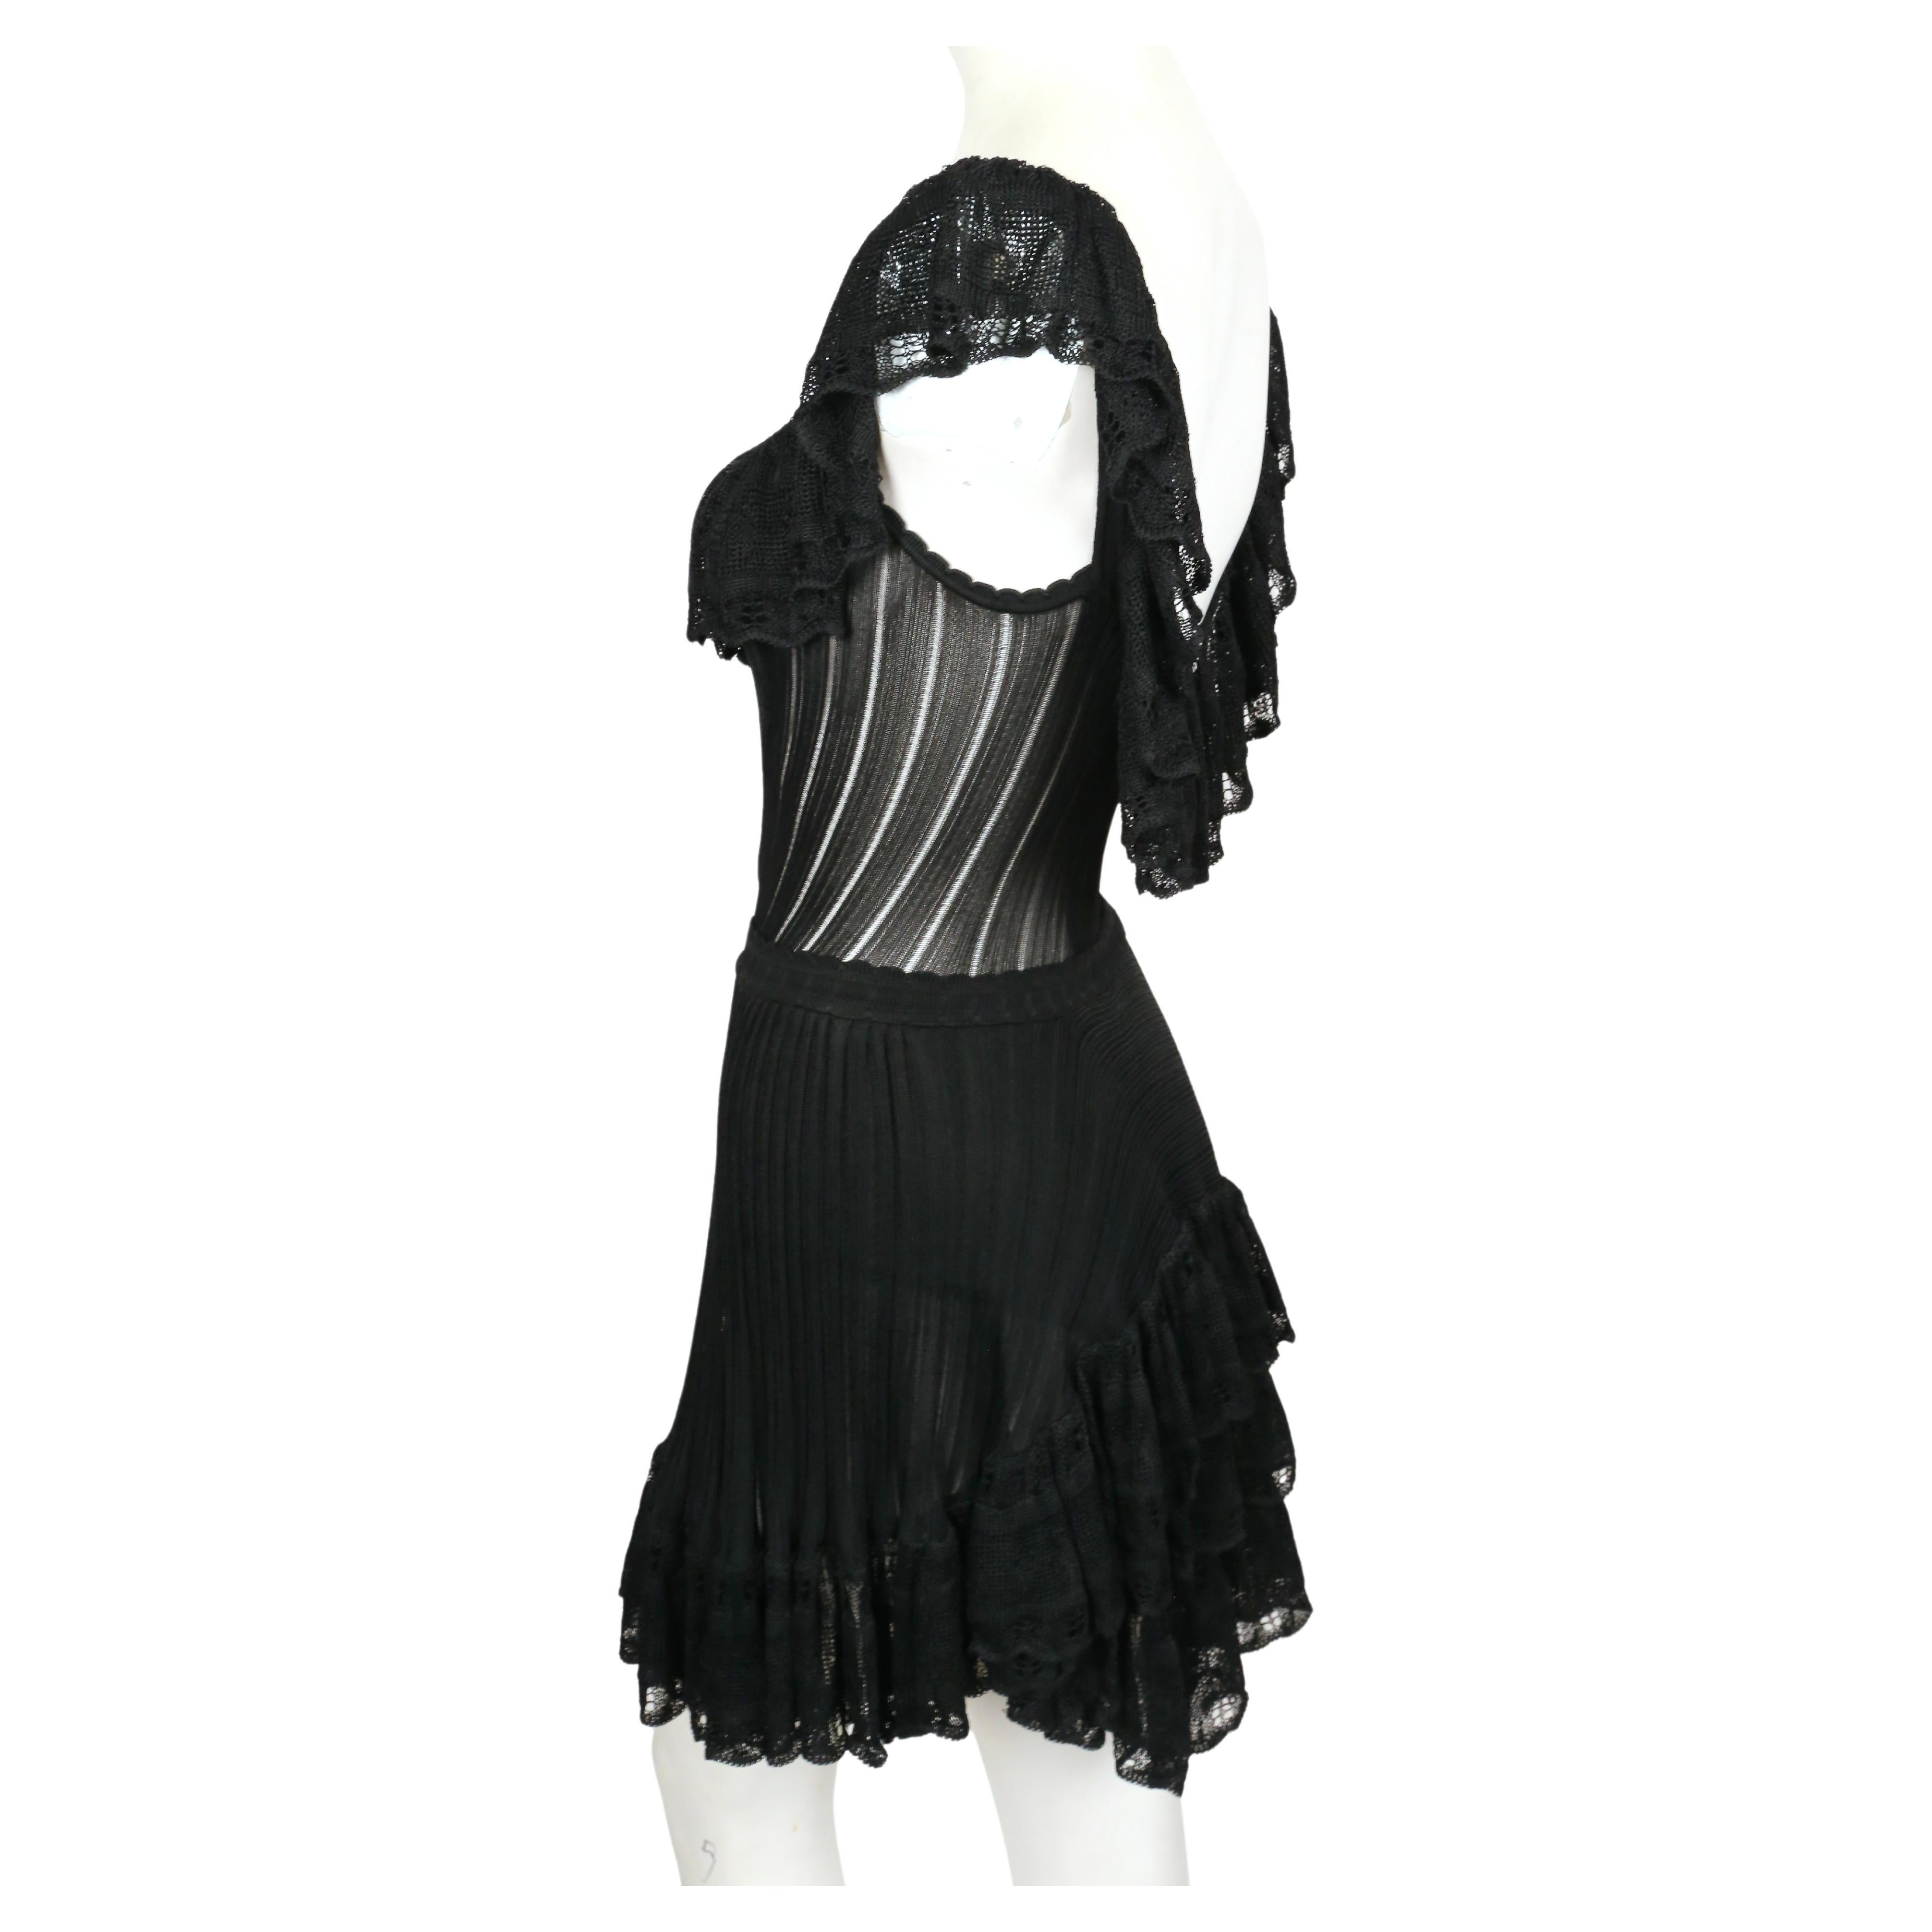  1992 AZZEDINE ALAIA black lace RUNWAY dress with bustle For Sale 3